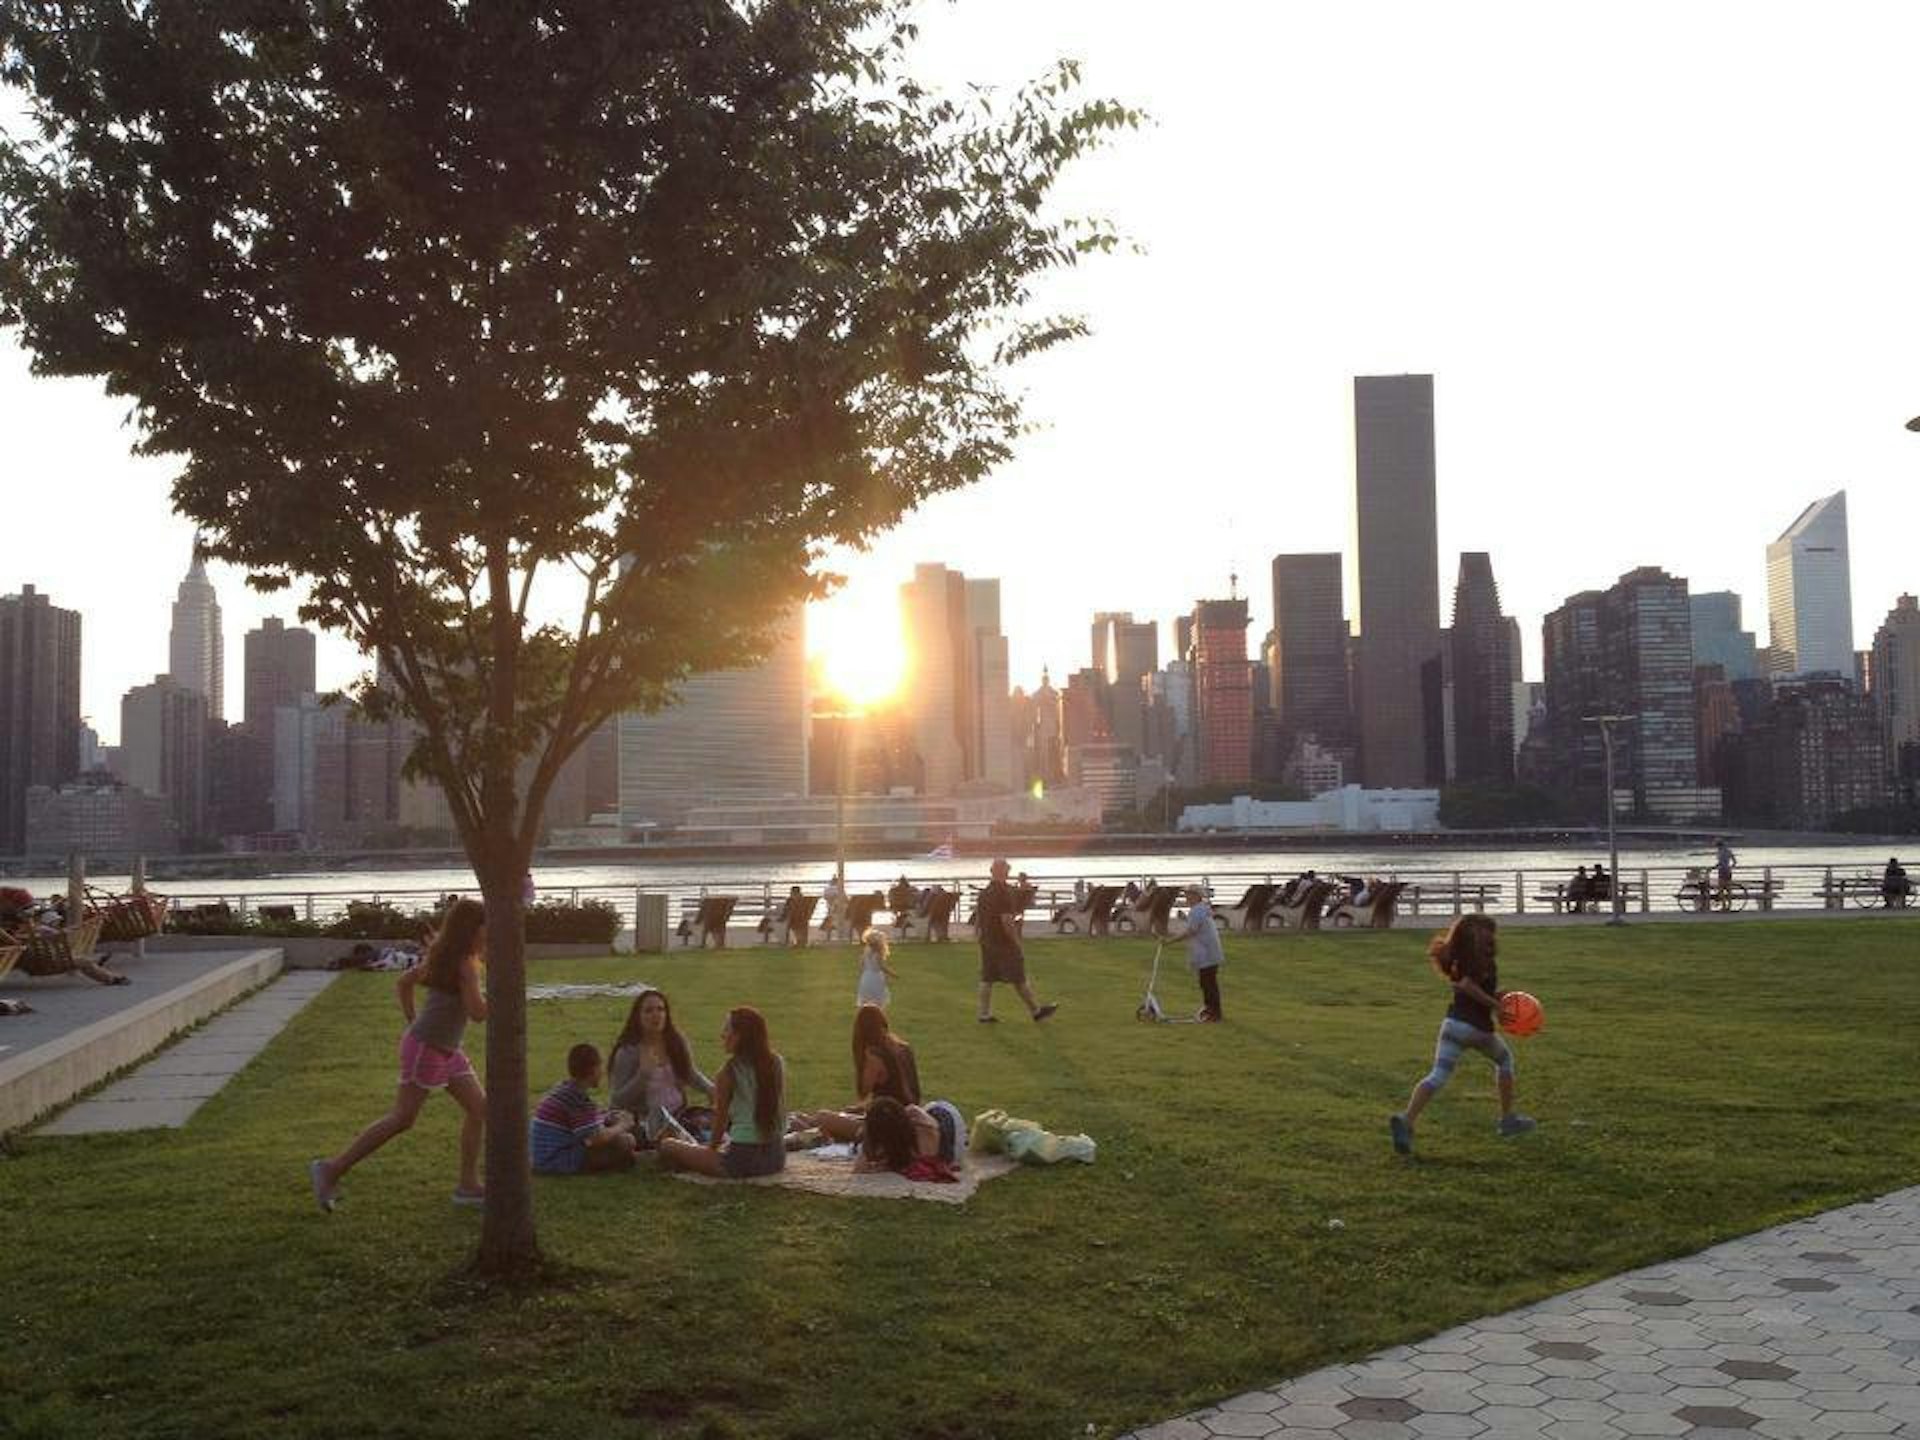 Enjoying the view of Manhattan from Long Island City, Queens. Image courtesy of LIC Partnership.